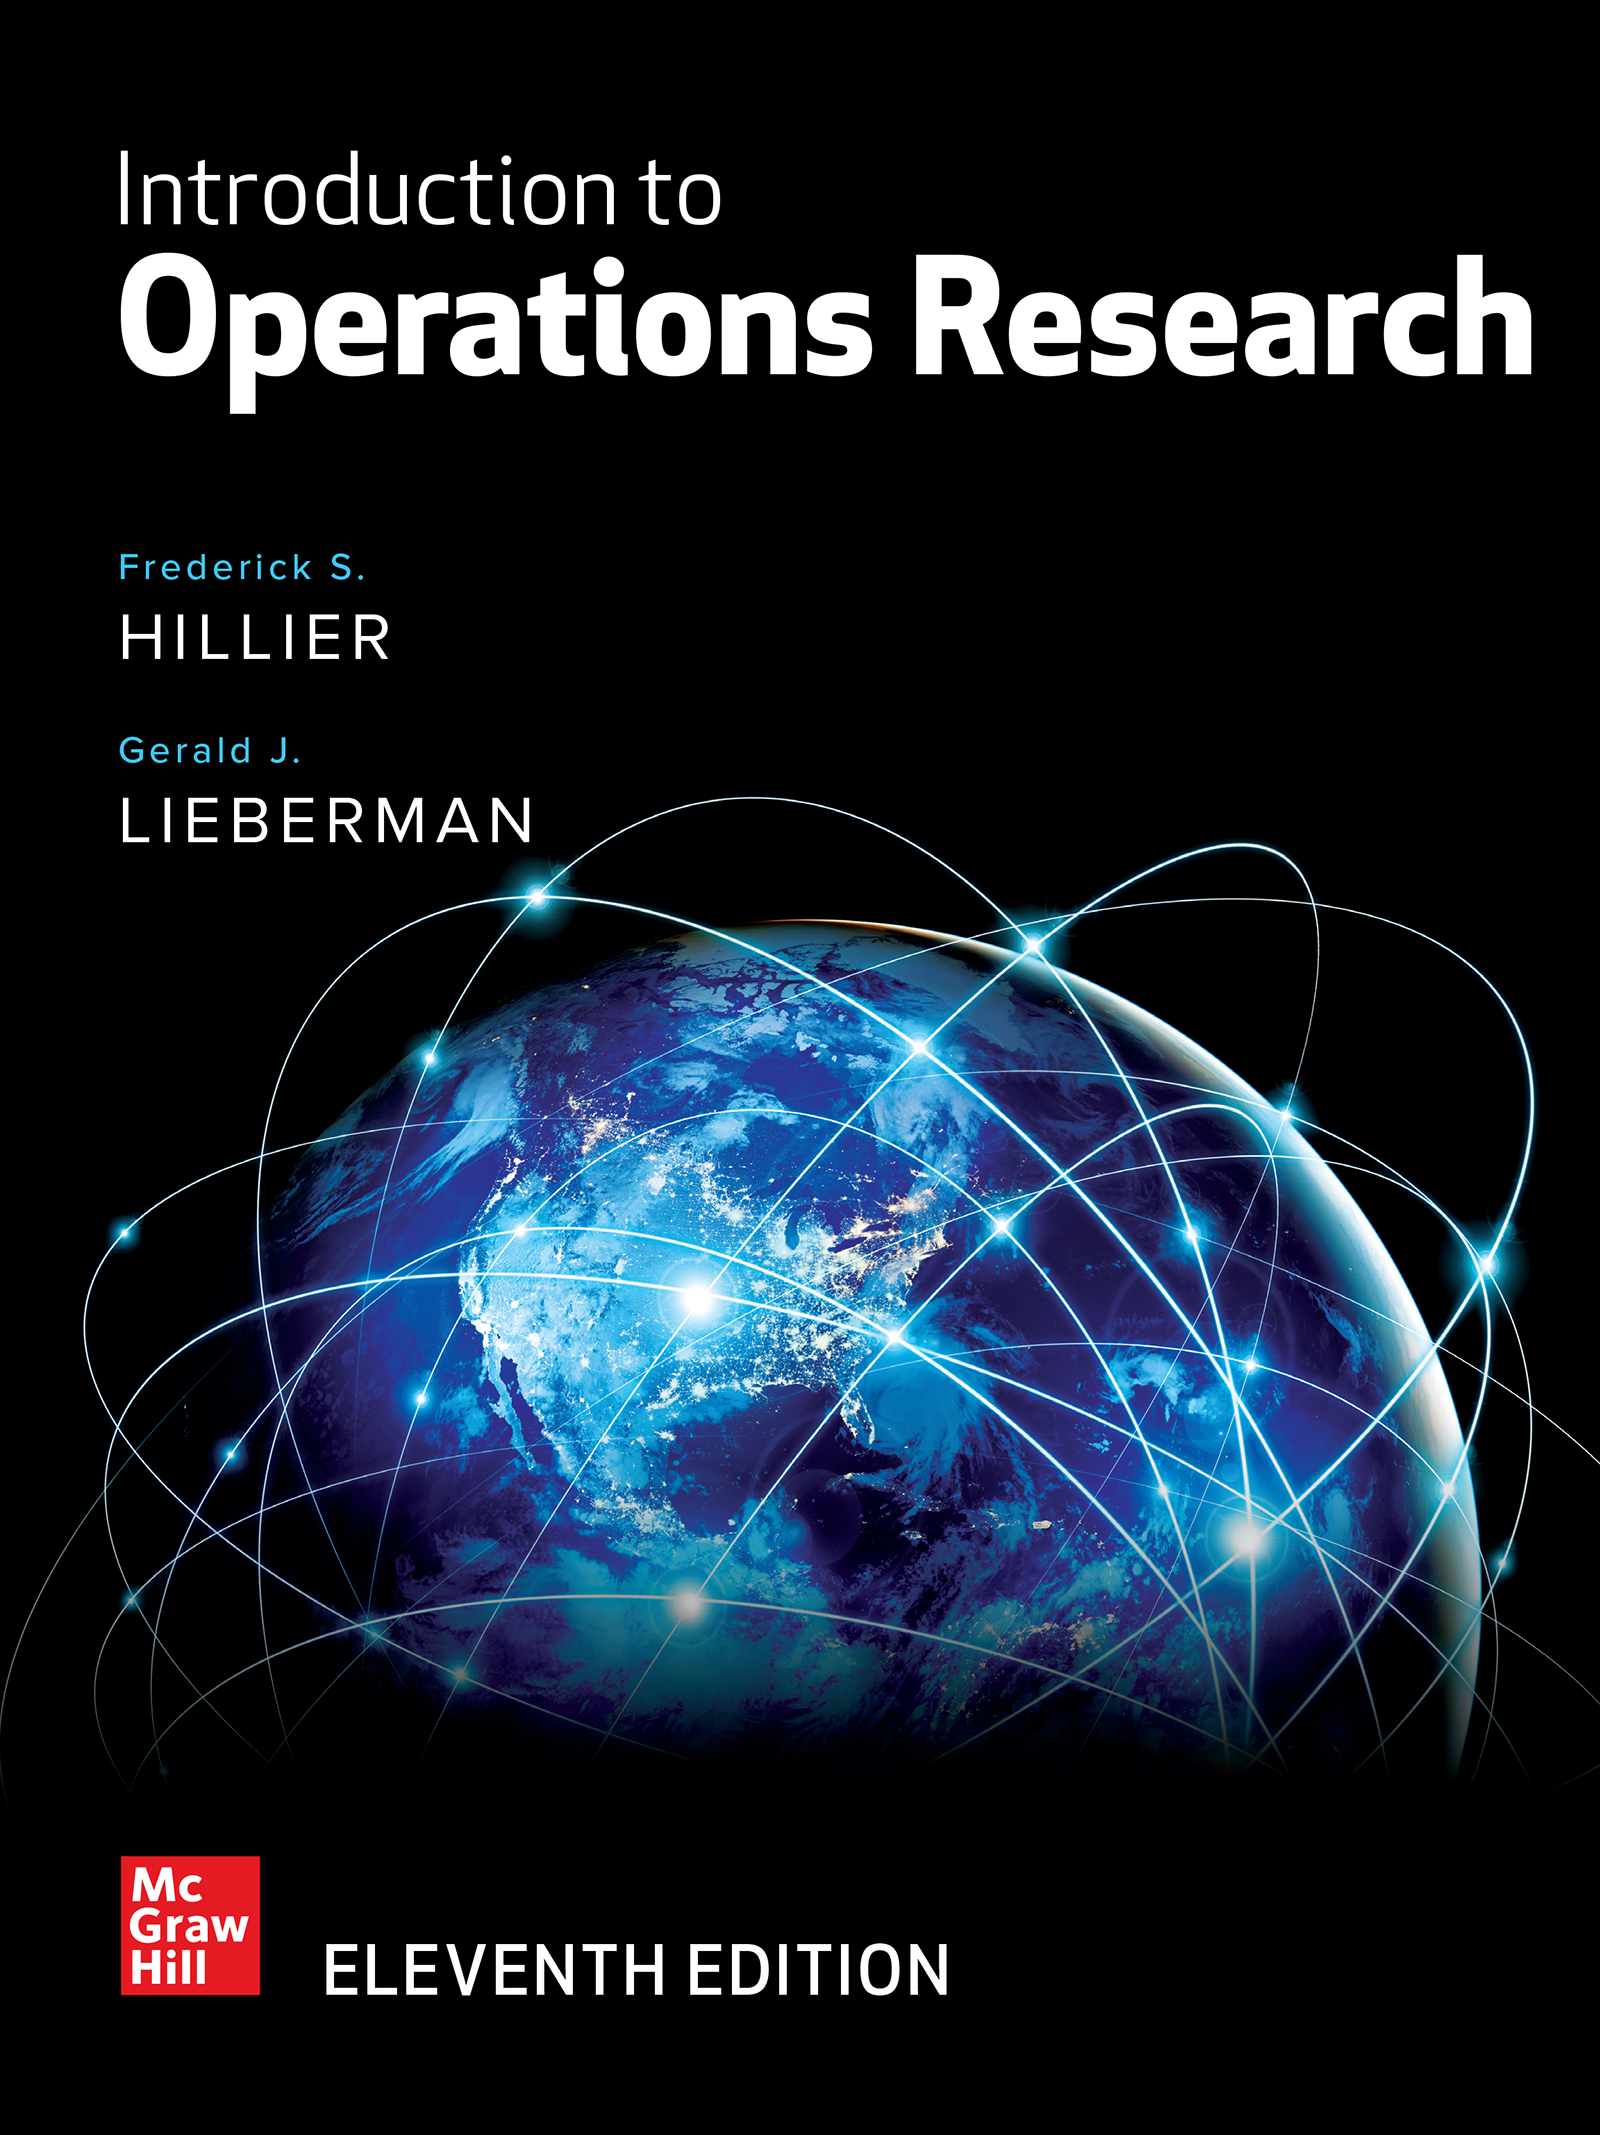 operations research paper ideas